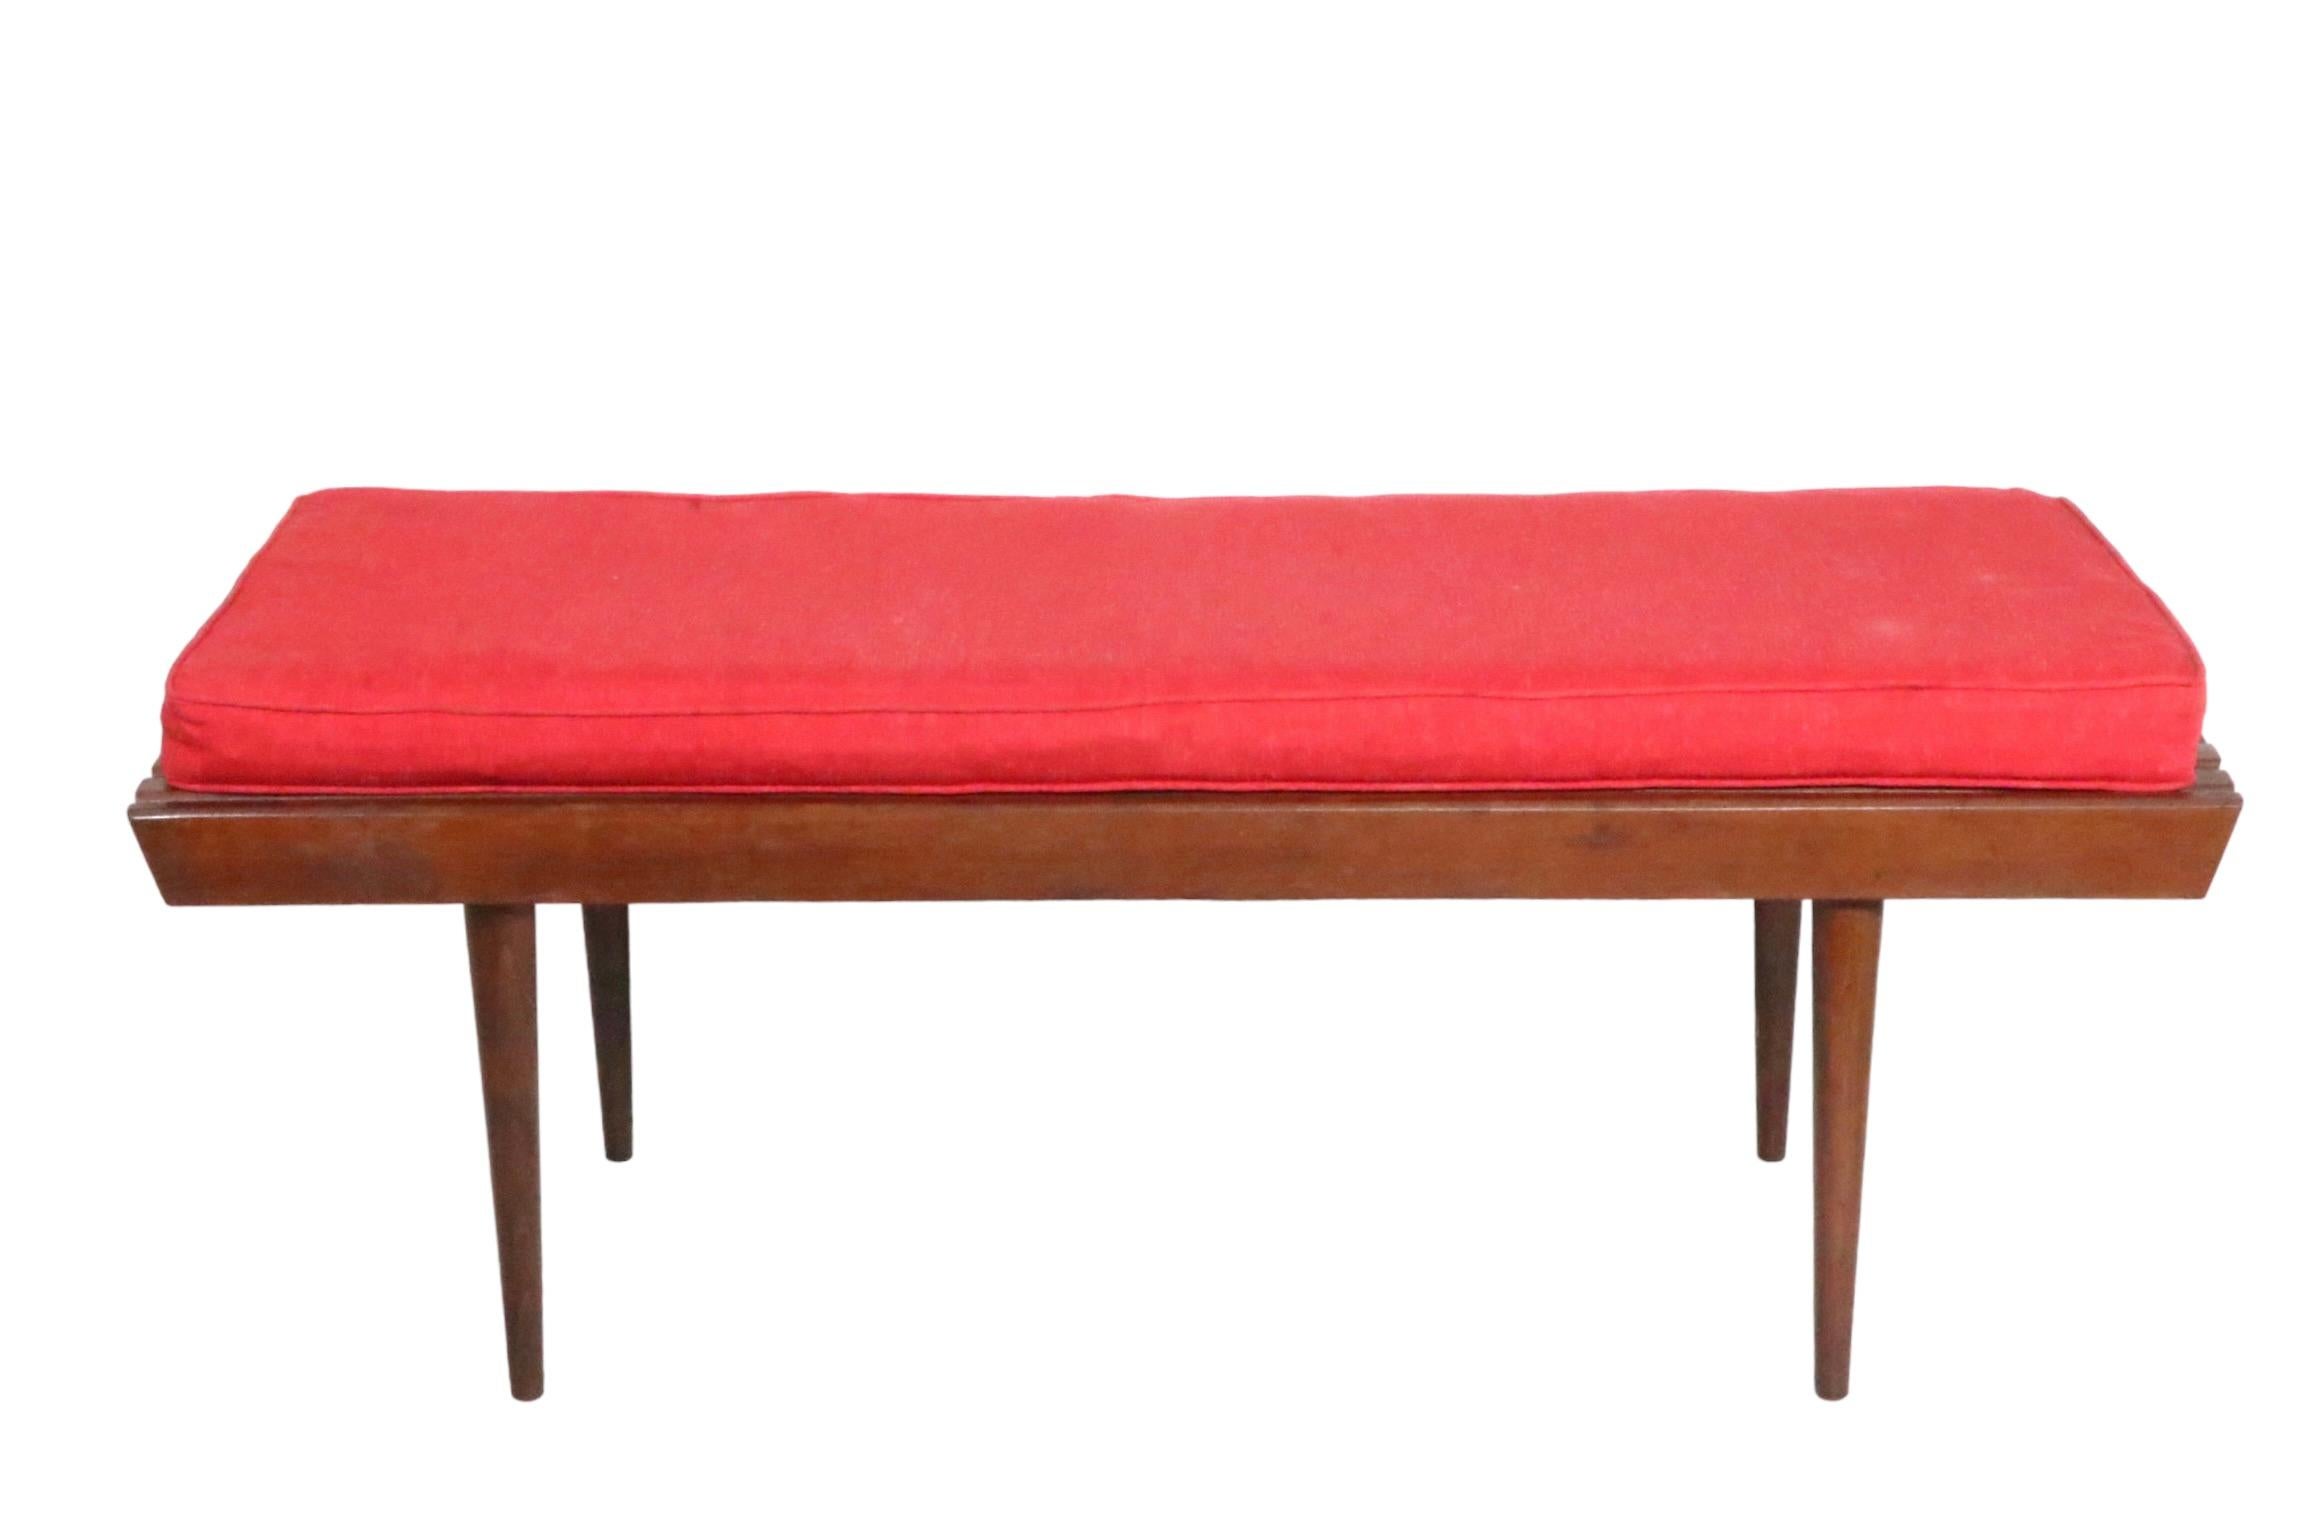 Iconic slat bench coffee table, bench made in Yugoslavia, after George Nelson, circa 1950/1960's. Constructed of solid wood, in very good, original, clean and ready to use condition, showing only light cosmetic wear, normal and consistent with